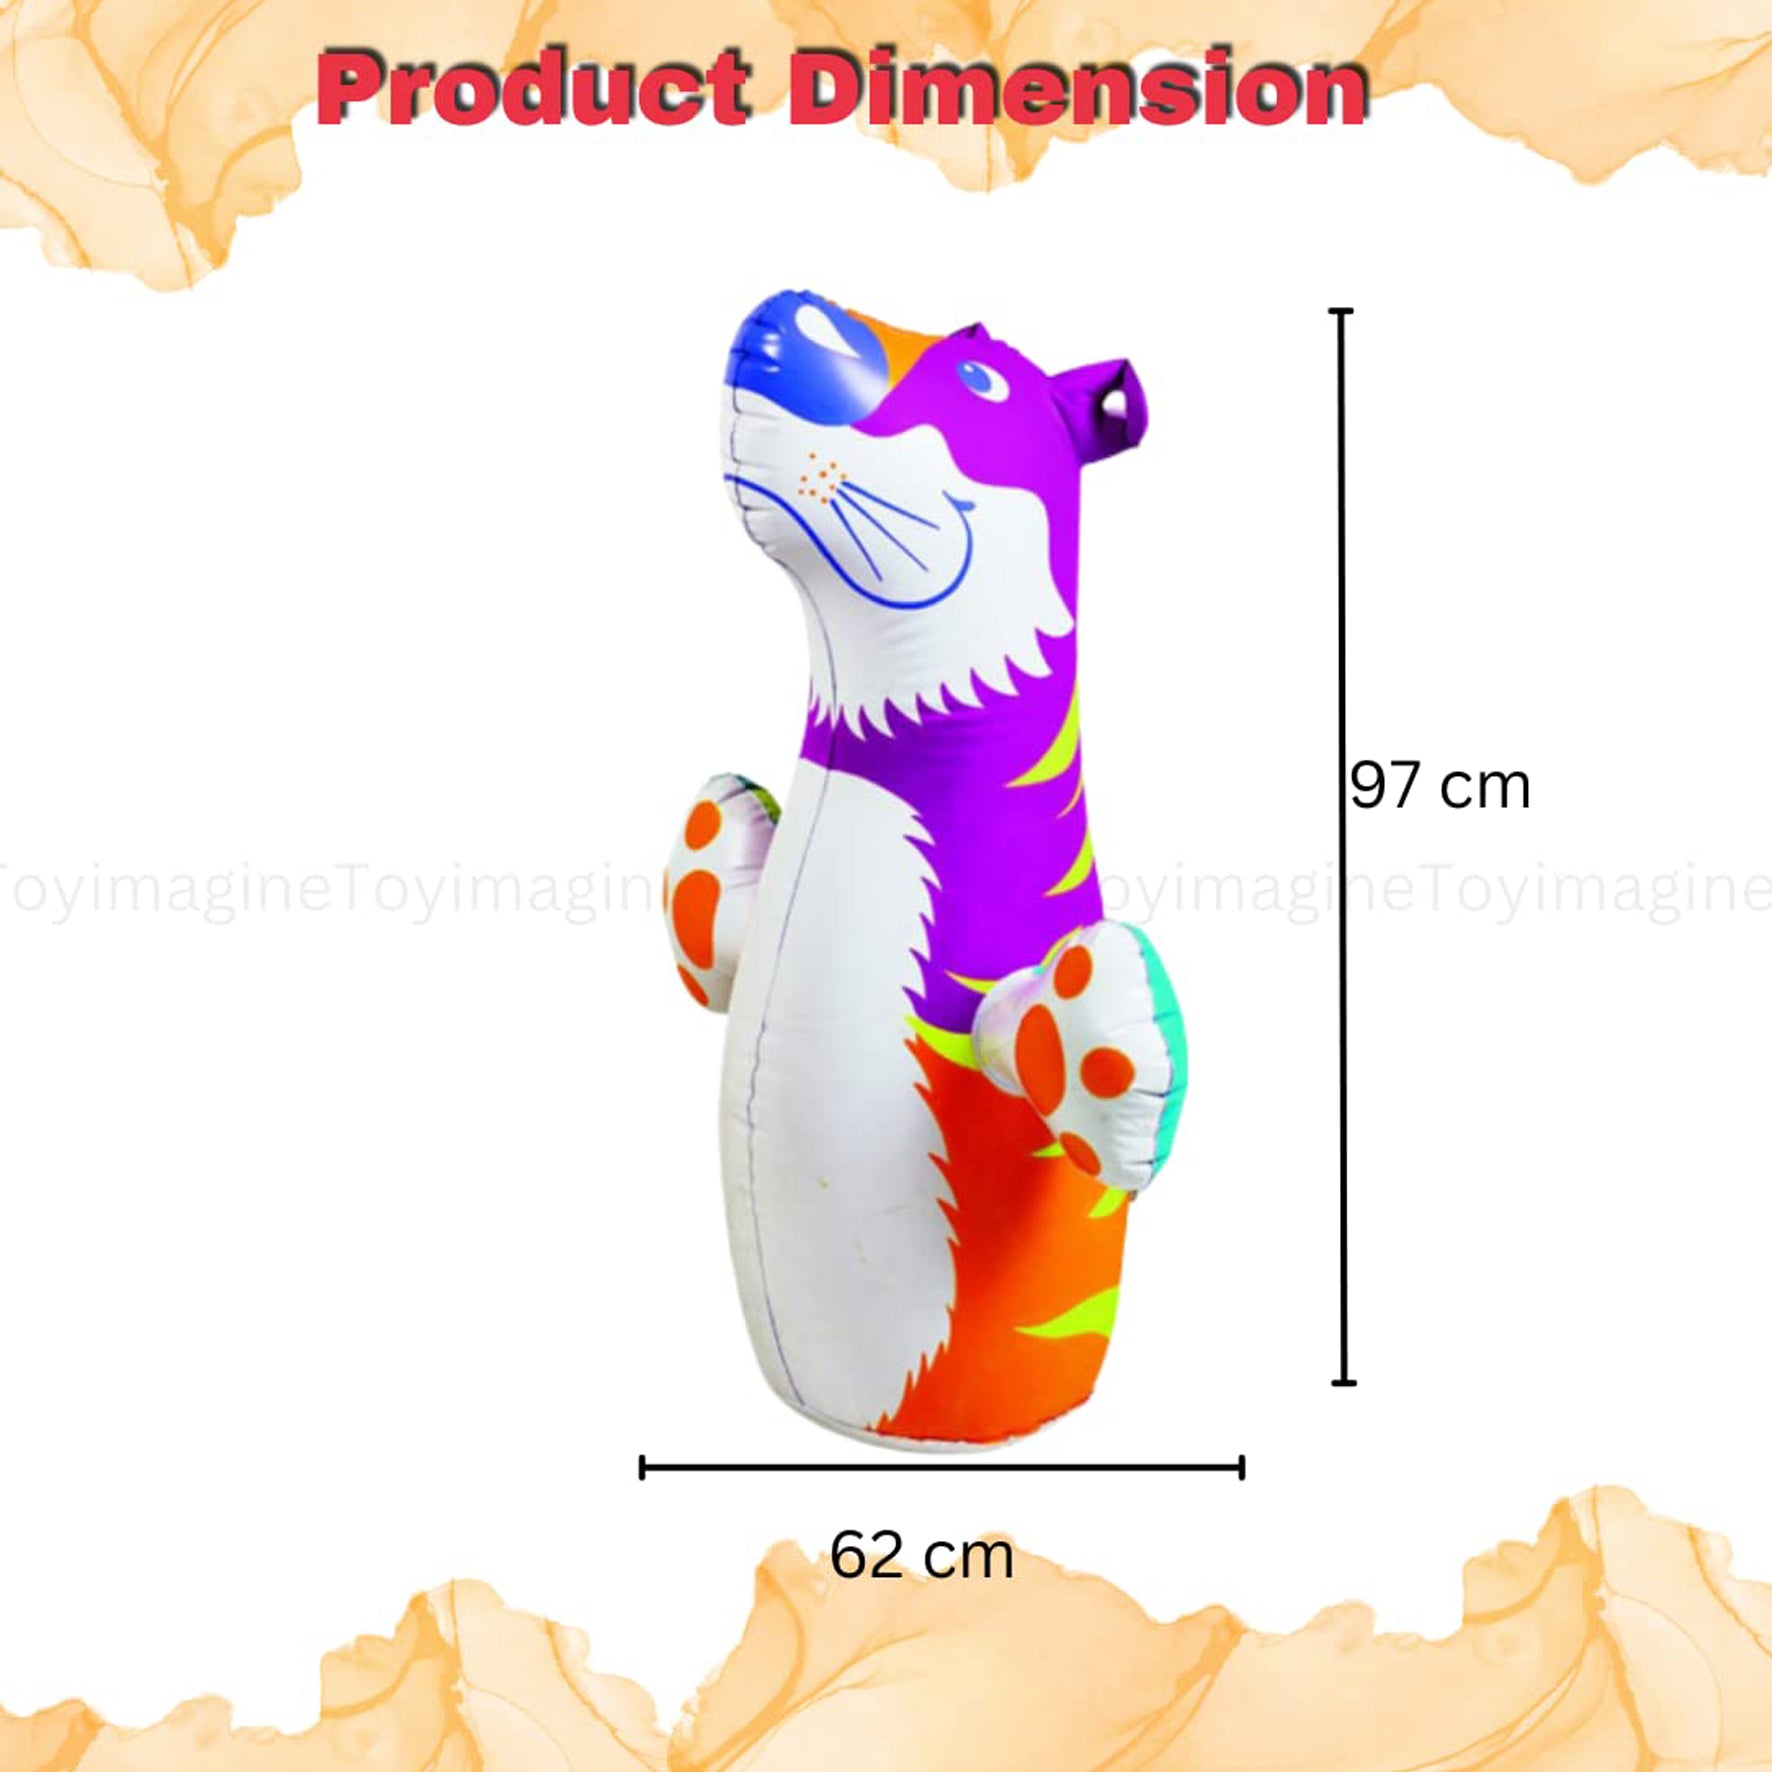 Tiger Hit Me Toy 3-D Inflatable Animal Toy | Water Base and Air Base for Toddlers | PVC Punching Bag for Kids | Activity Toy for Kids Age 3 +.